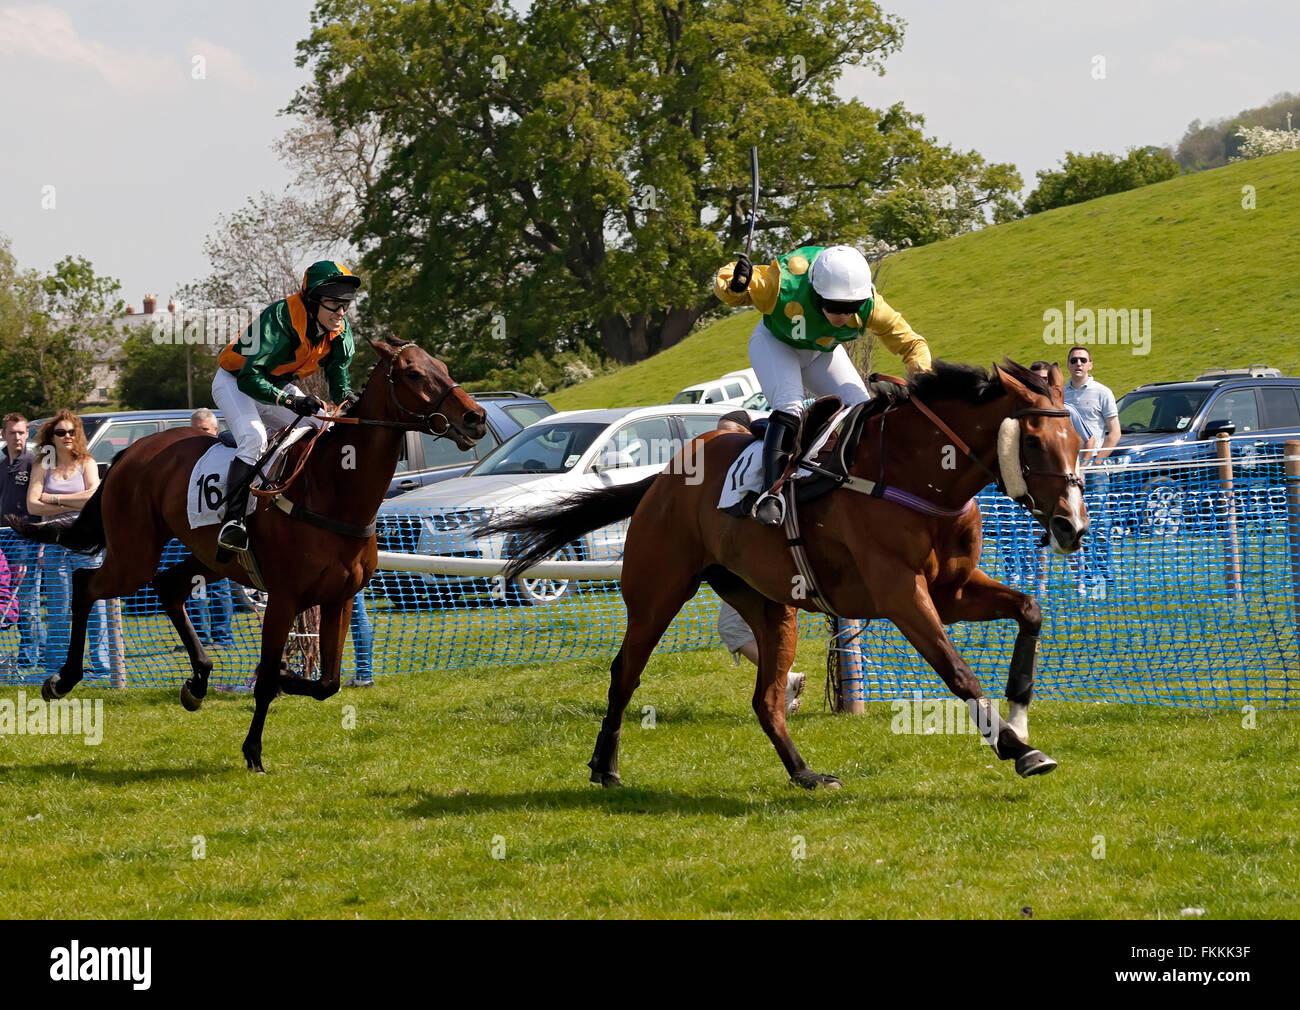 Horses racing at a Point-to-Point Stock Photo